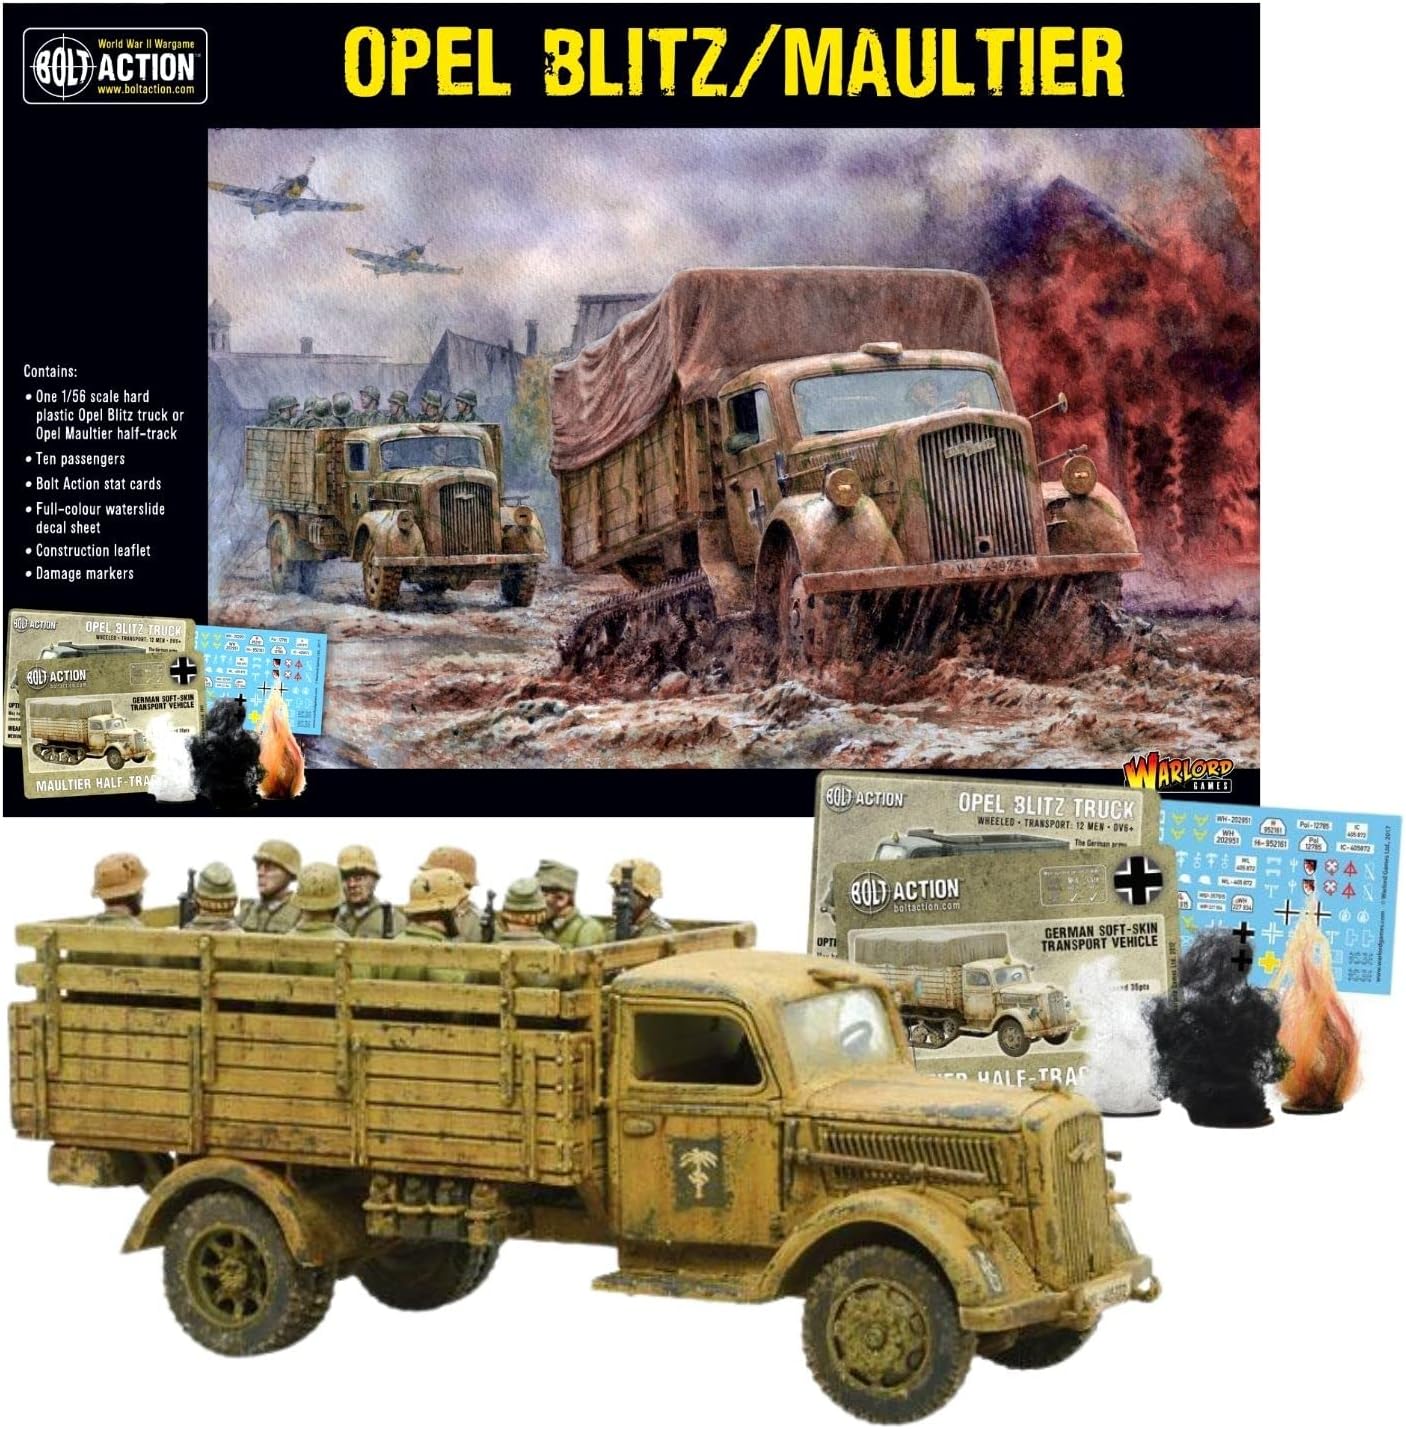 Opel Blitz/Maultier-Bolt Action-Warlord Games 